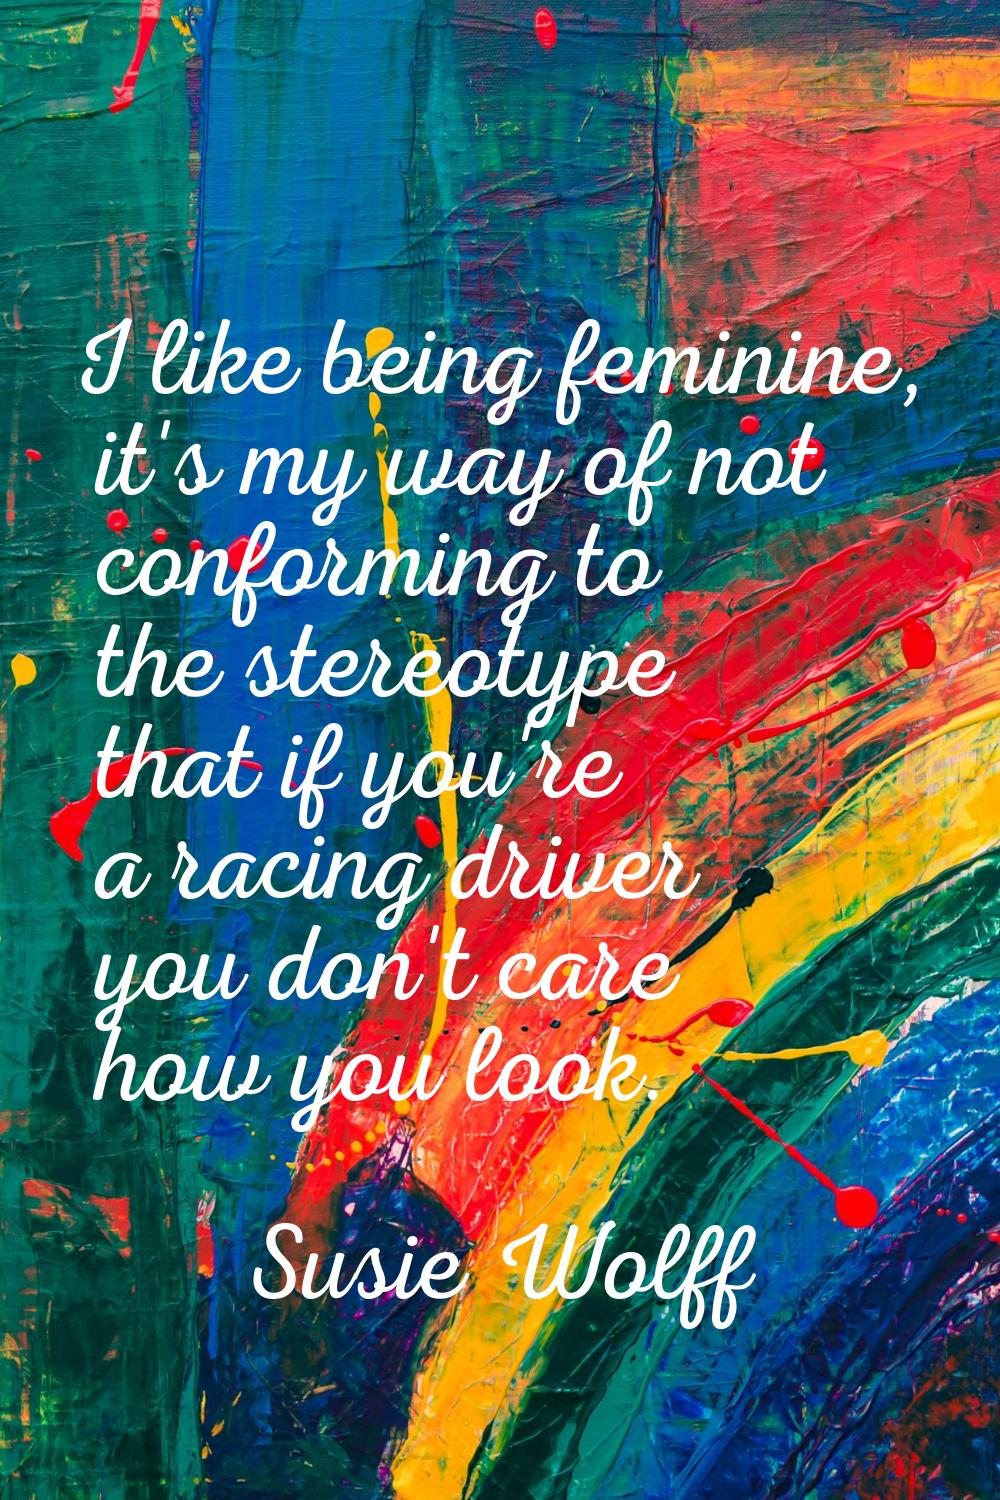 I like being feminine, it's my way of not conforming to the stereotype that if you're a racing driv